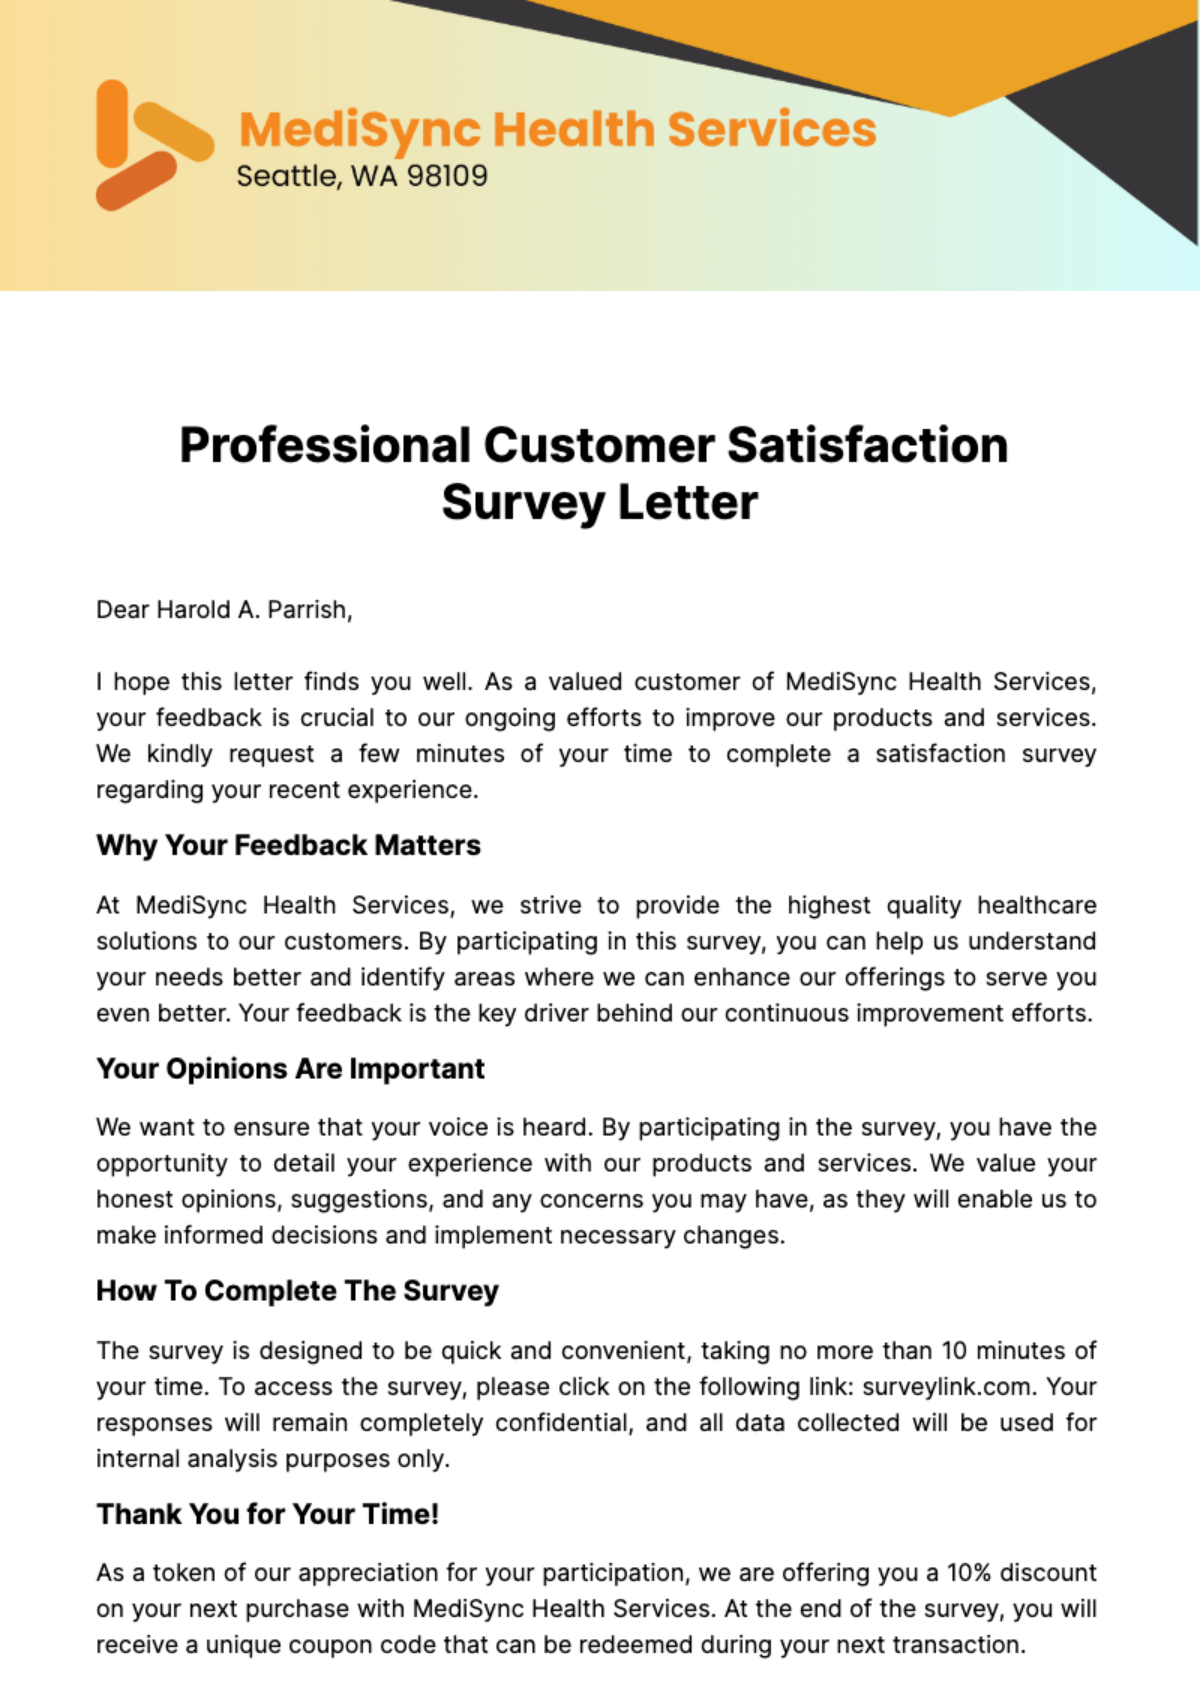 Free Professional Customer Satisfaction Survey Letter Template